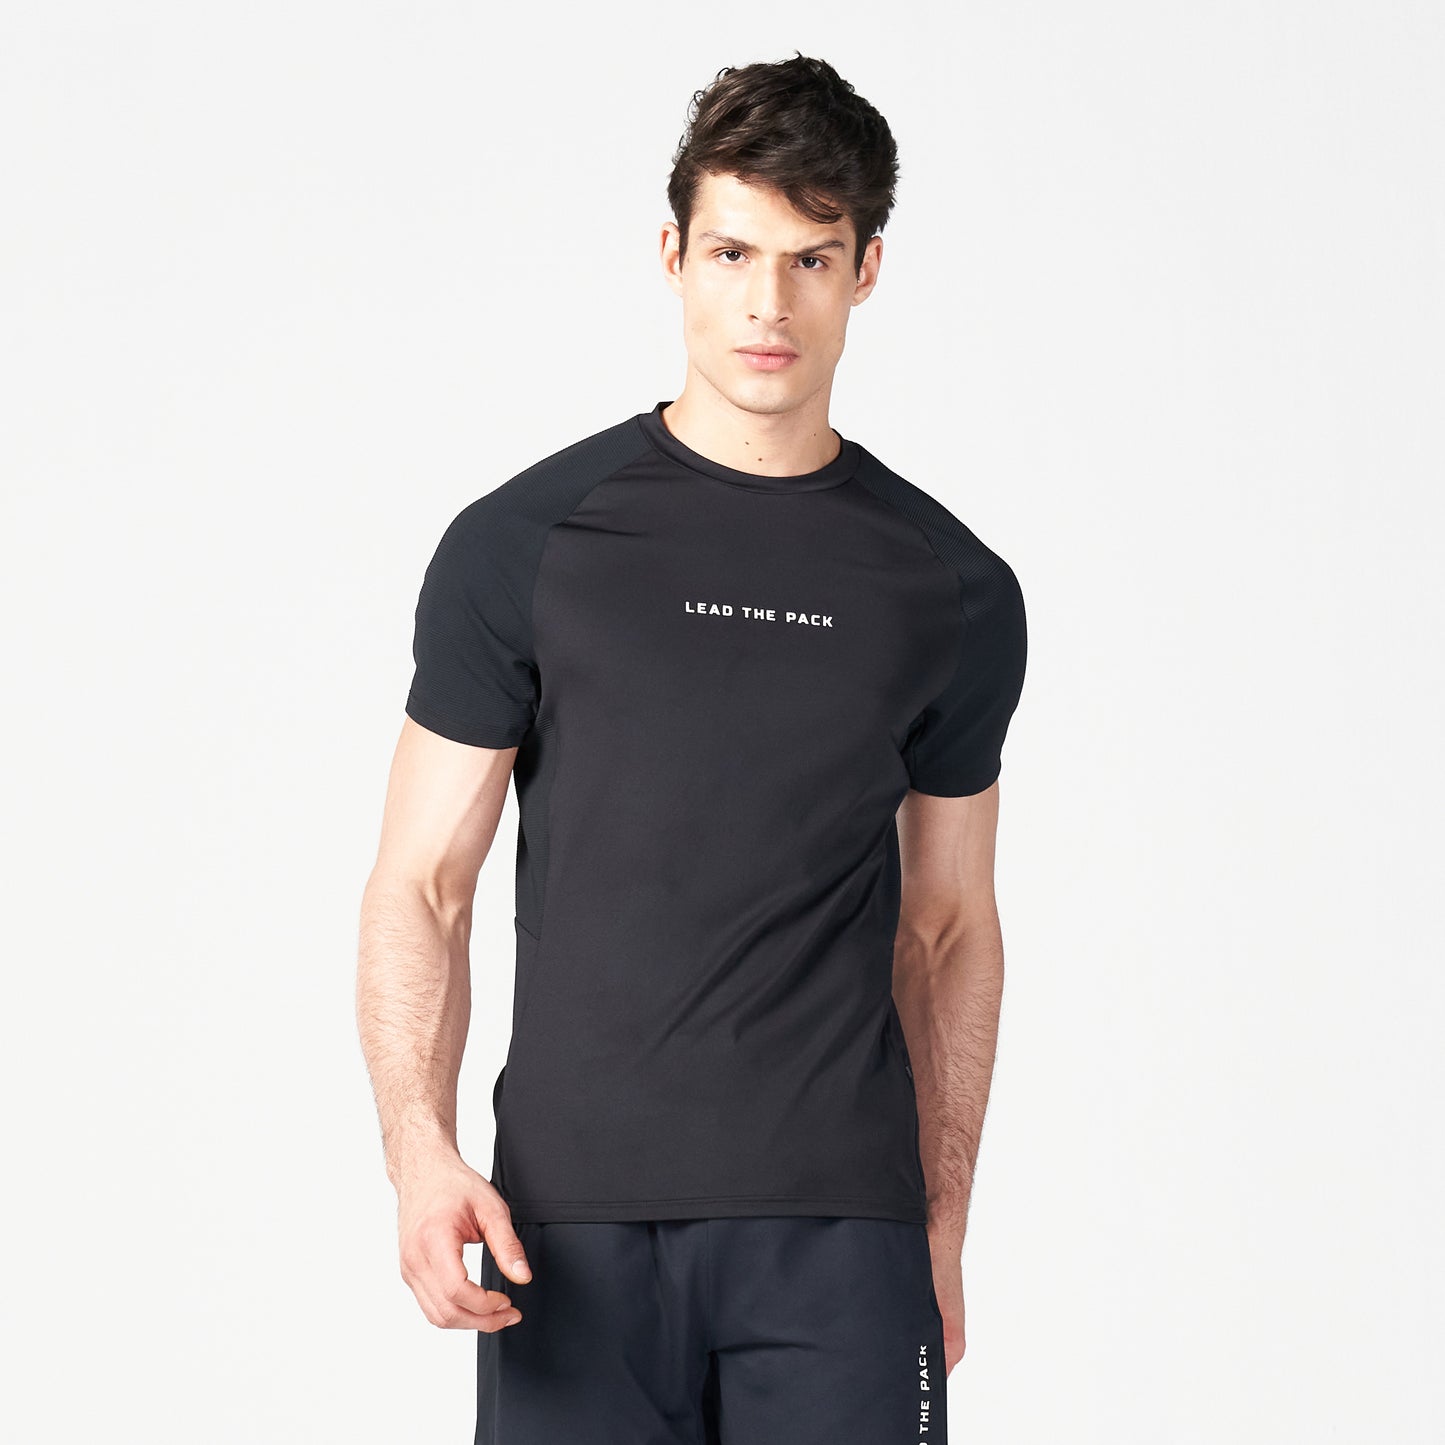 squatwolf-gym-wear-ribbed-tech-tee-black-workout-shirts-for-men